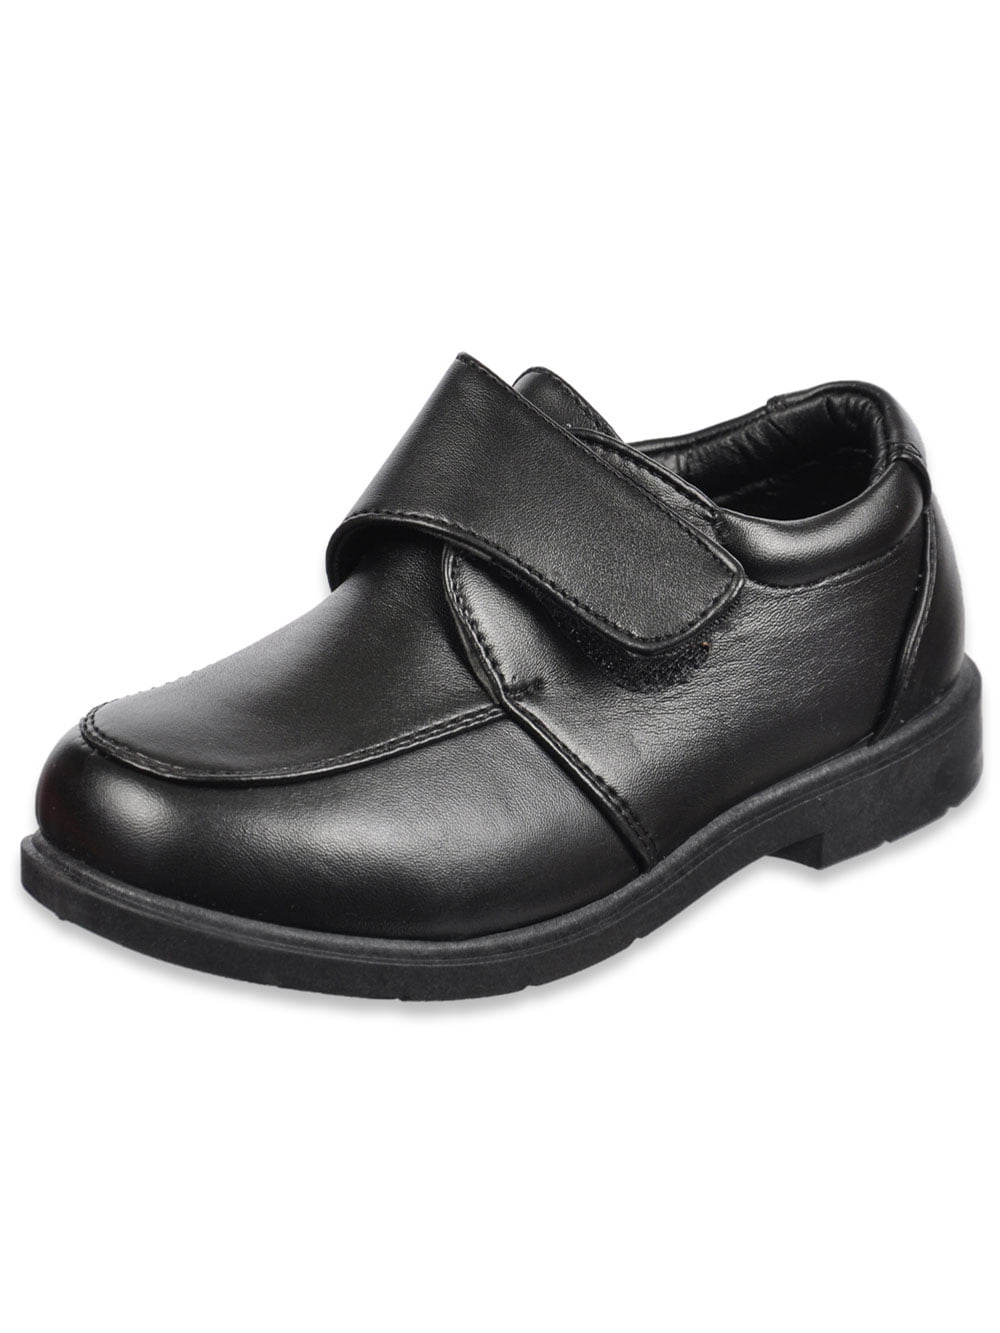 Shoes (Boys Youth Sizes 